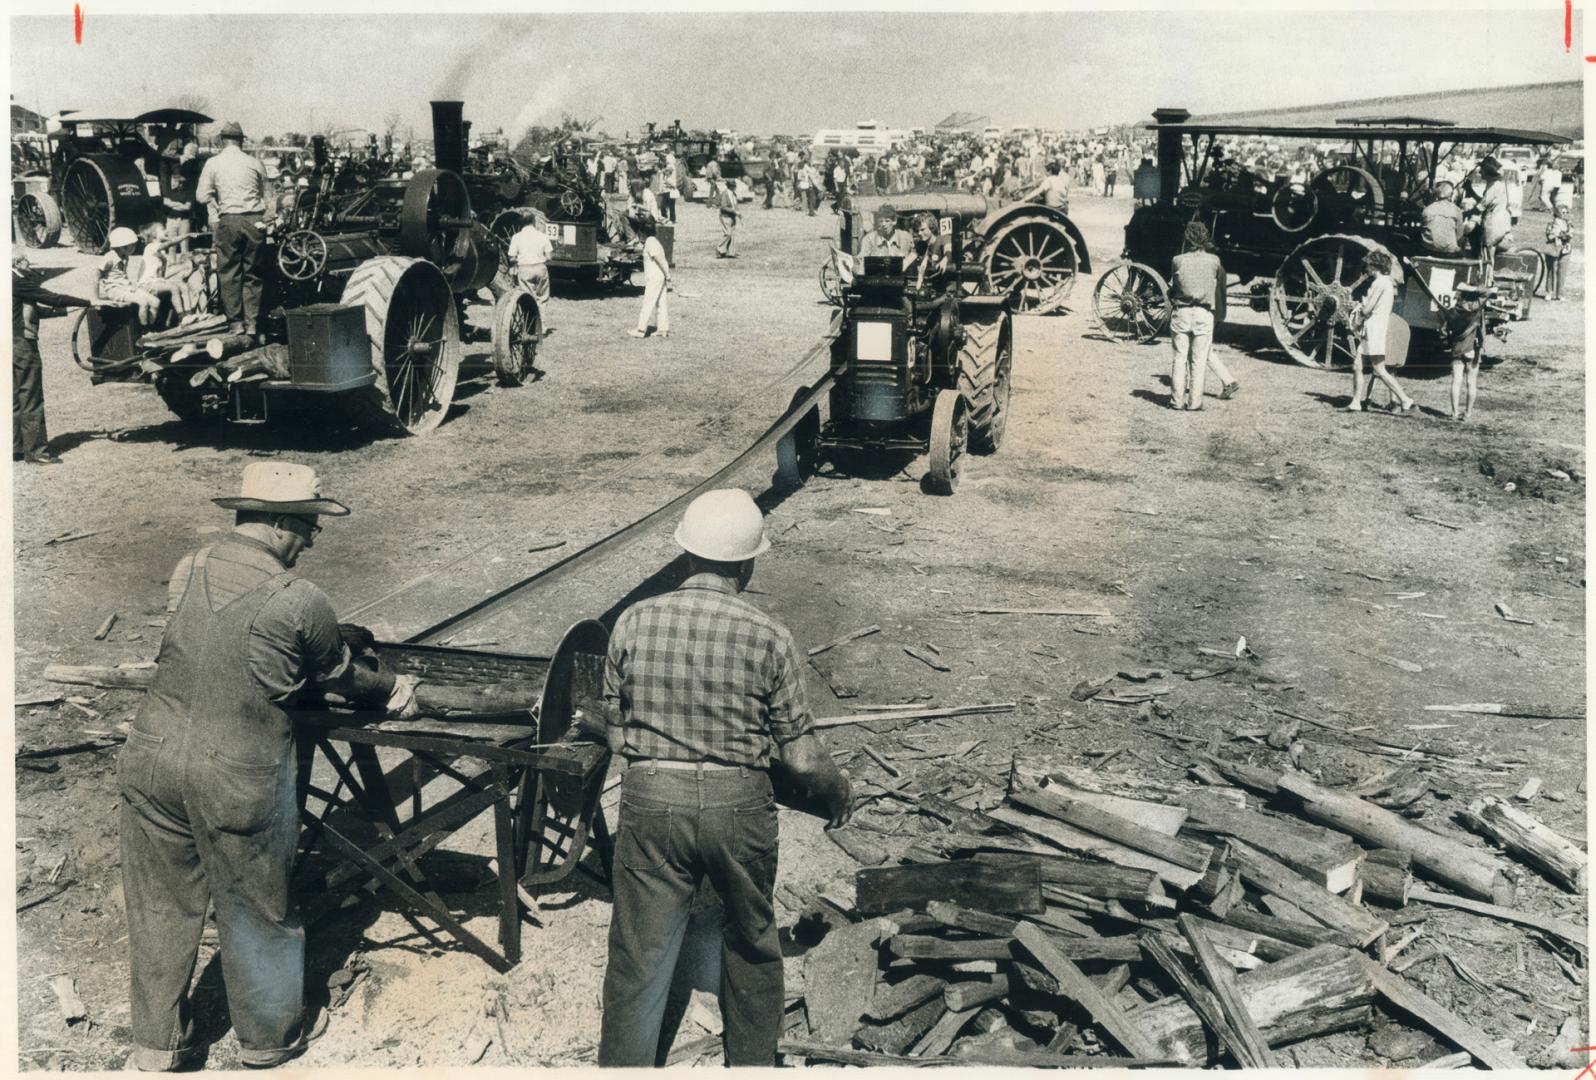 Hundreds of cords of wood had to be cut to keep up full heads of steam in varous old time farm tractors and machinery that buffed and puffed nostalgic(...)